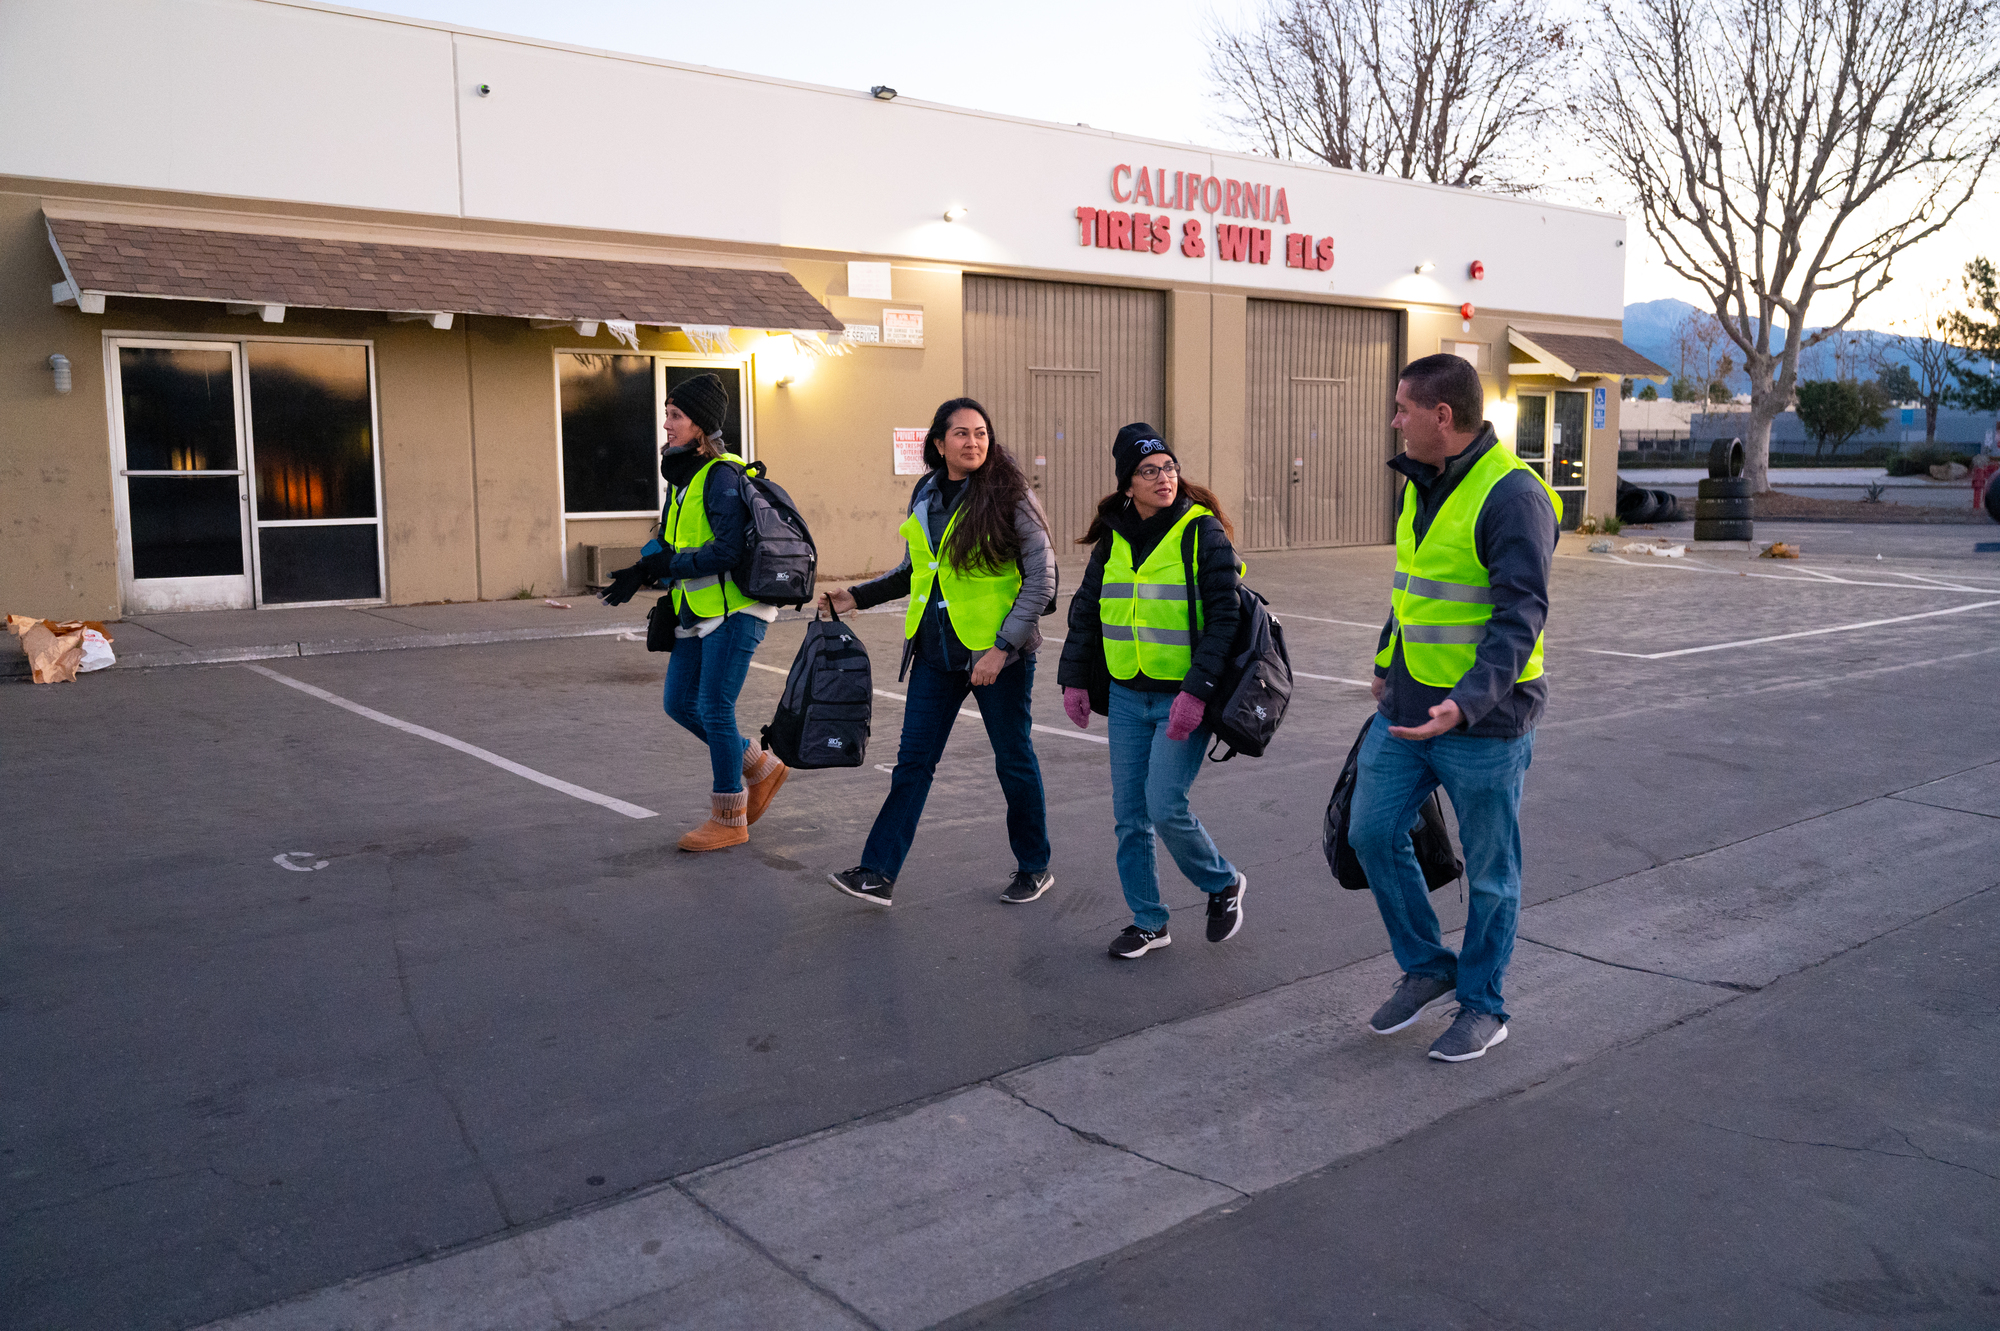 A group of four volunteers seen walking side-by-side in a street with a business store seen in the background.